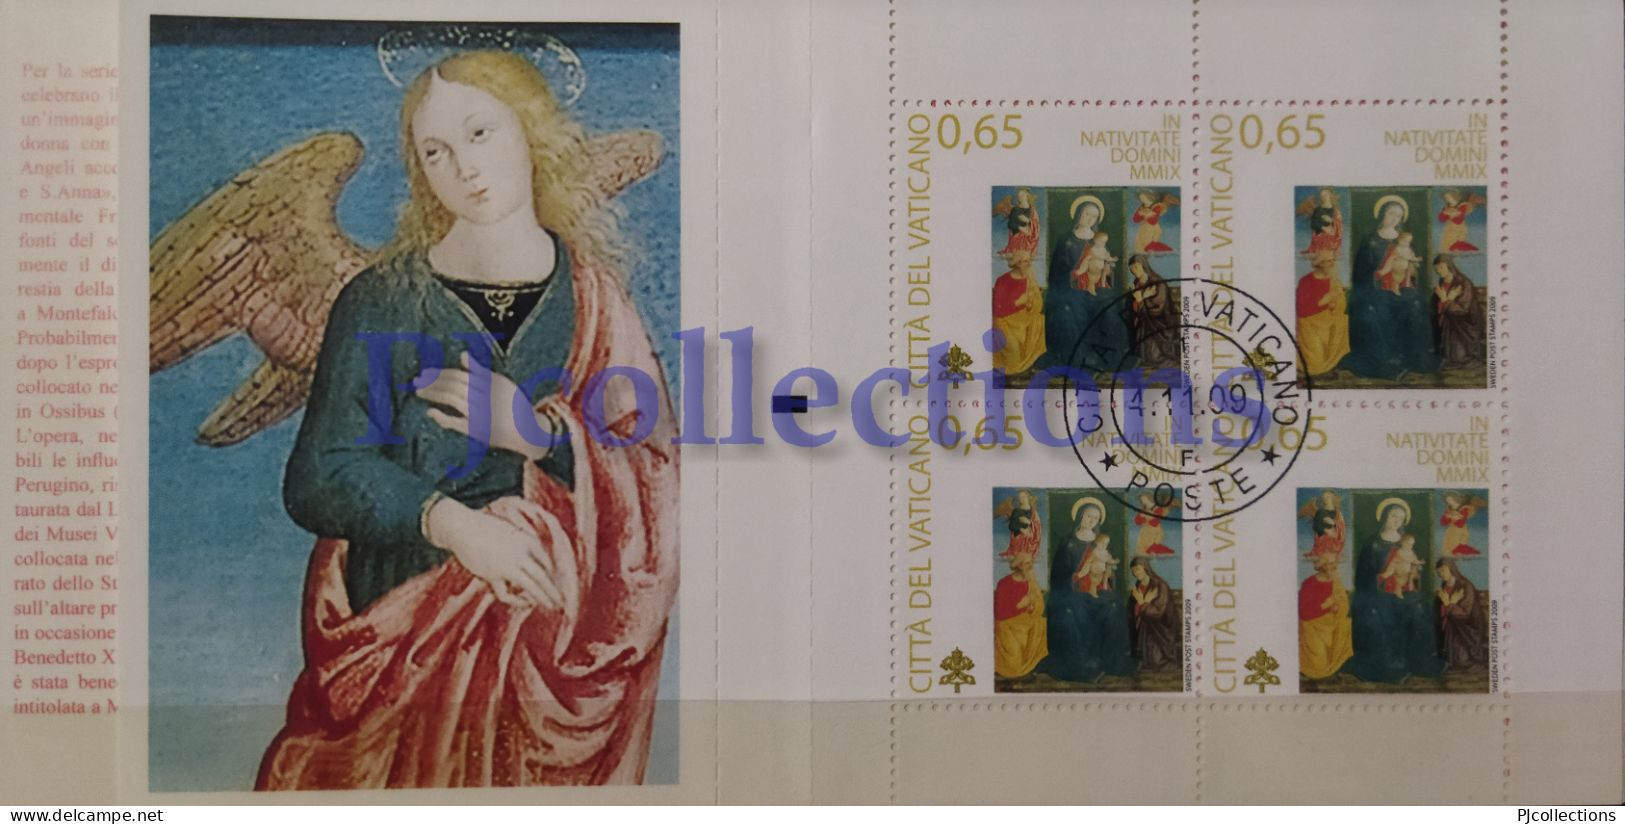 3763- VATICANO- VATICAN CITY 2009 NATALE - CHRISTMAS FULL BOOKLET 4 STAMPS C/ANNULLO 1° GIORNO - USED - Used Stamps